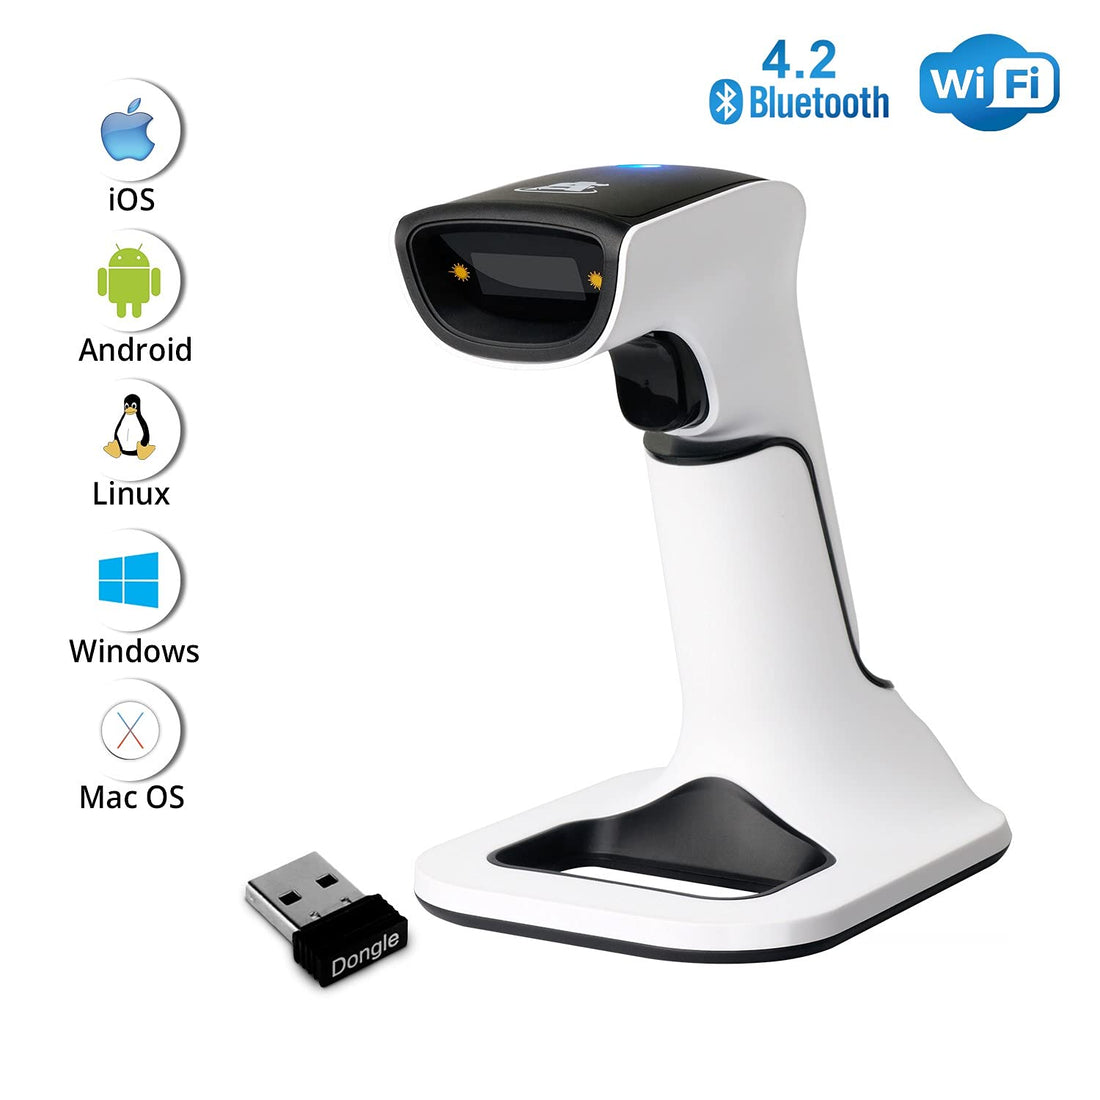 ScanAvenger Wireless Portable 1D&2D with Stand Bluetooth Barcode Scanner: 3-in-1 Vibration, Cordless, Rechargeable Scan Gun for Inventory Management - Handheld, USB Bar Code/QR Reader Hand Scanners